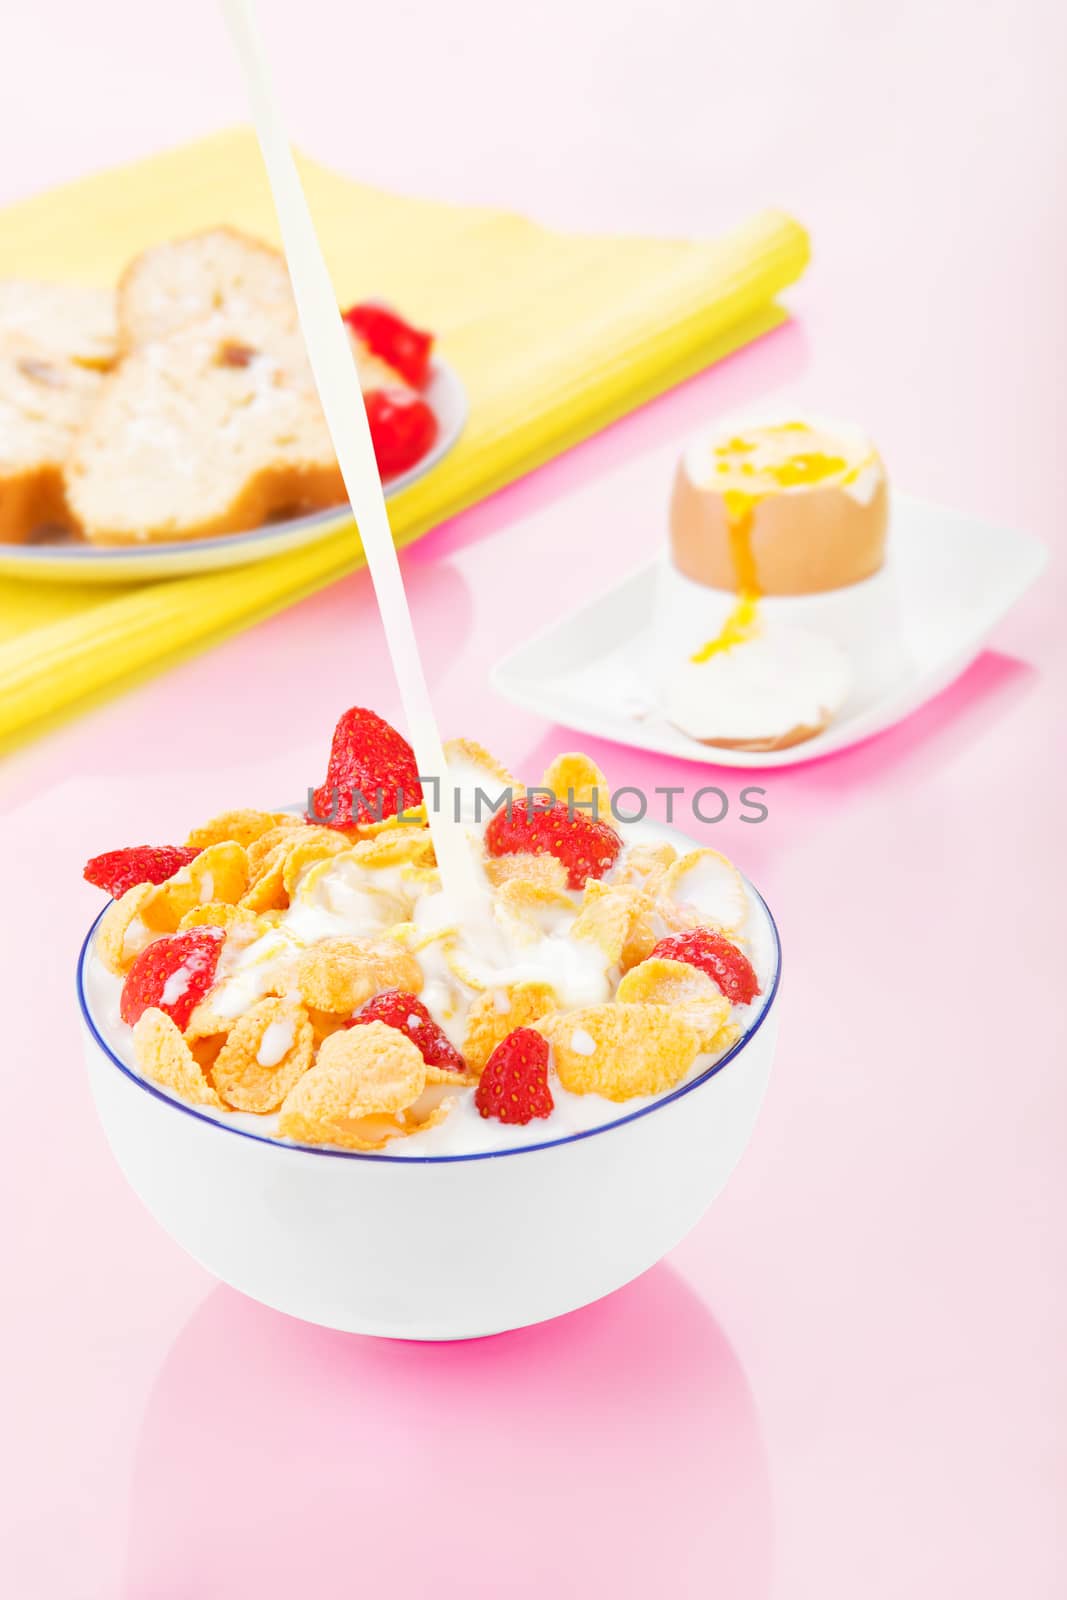 Delicious breakfast in pink and yellow. Cereal, egg and pastry. by eskymaks